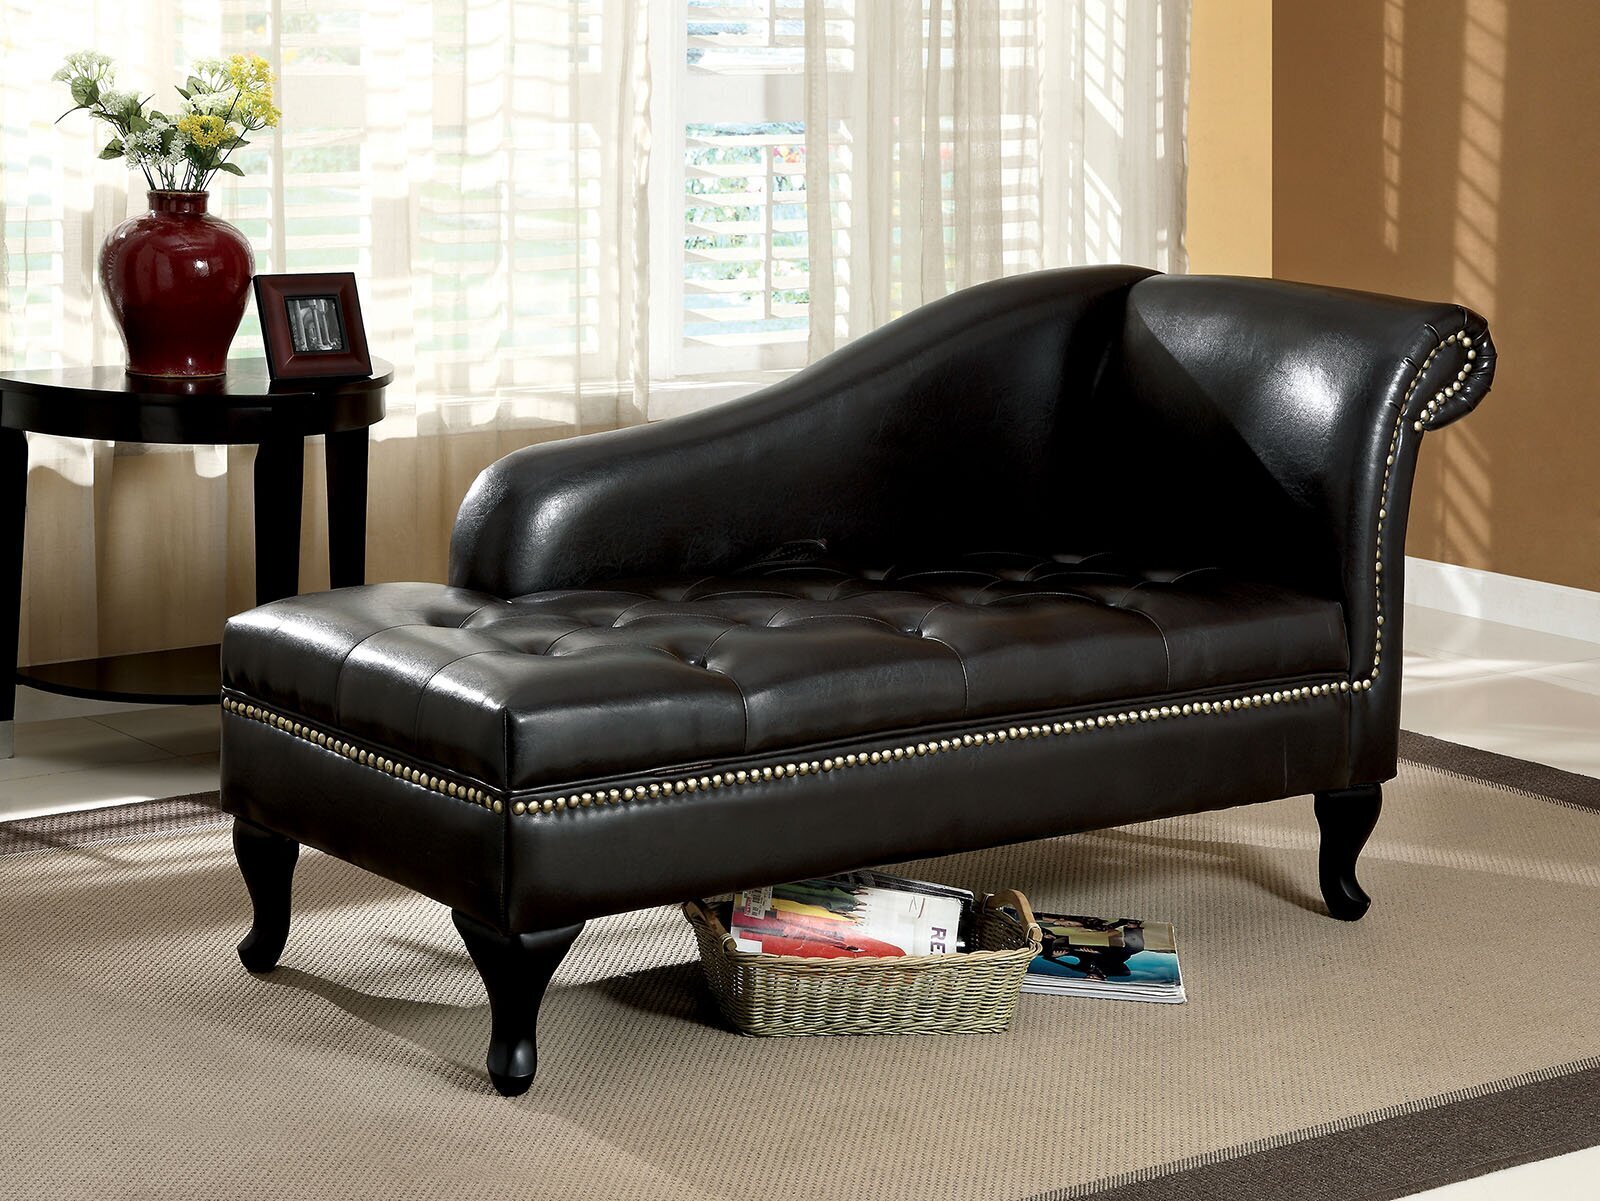 Faux leather vintage chaise lounge